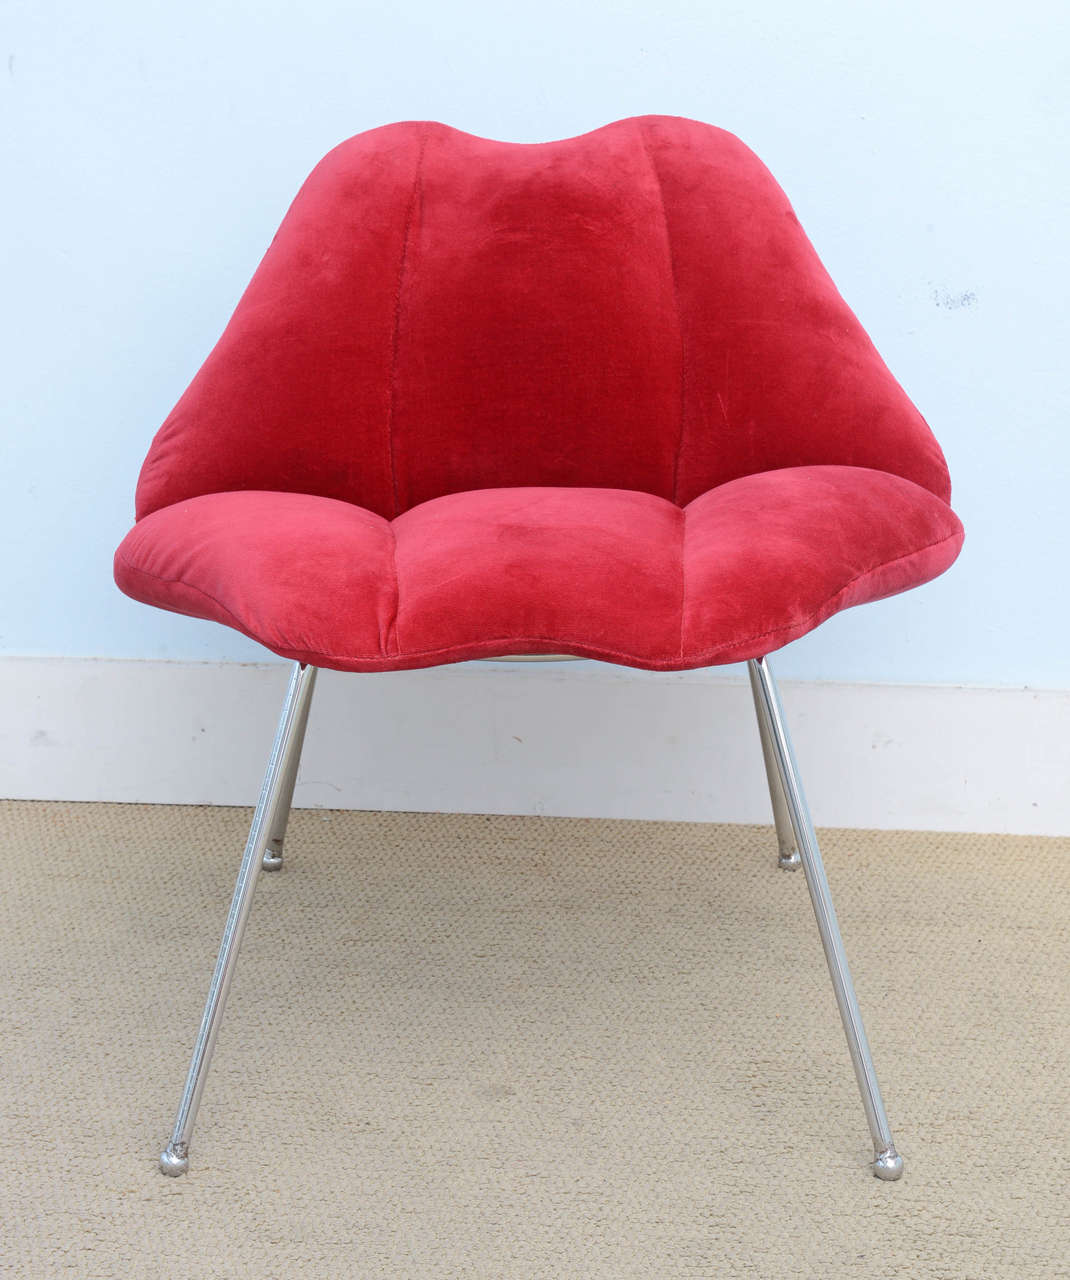 Beautiful pair of modern pop lip chairs, these will be great for a modern fun, or eclectic interior. Do not know the designer or country of origin, however they are quite amazing.